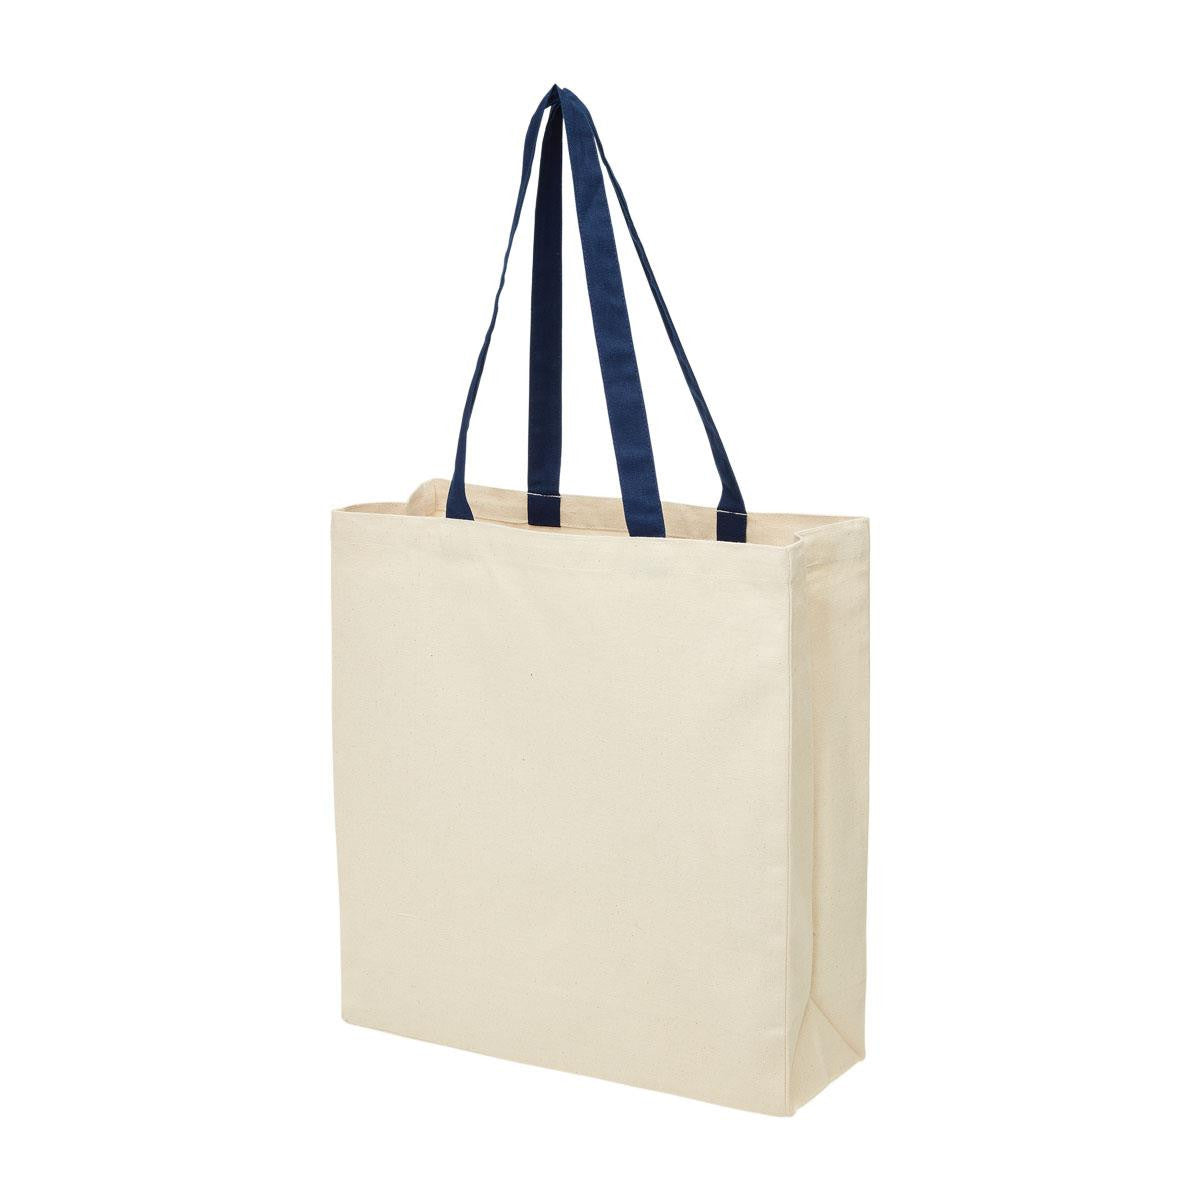 Legend Life-2002 Heavy Duty Canvas Tote with Gusset (Pack of 15)